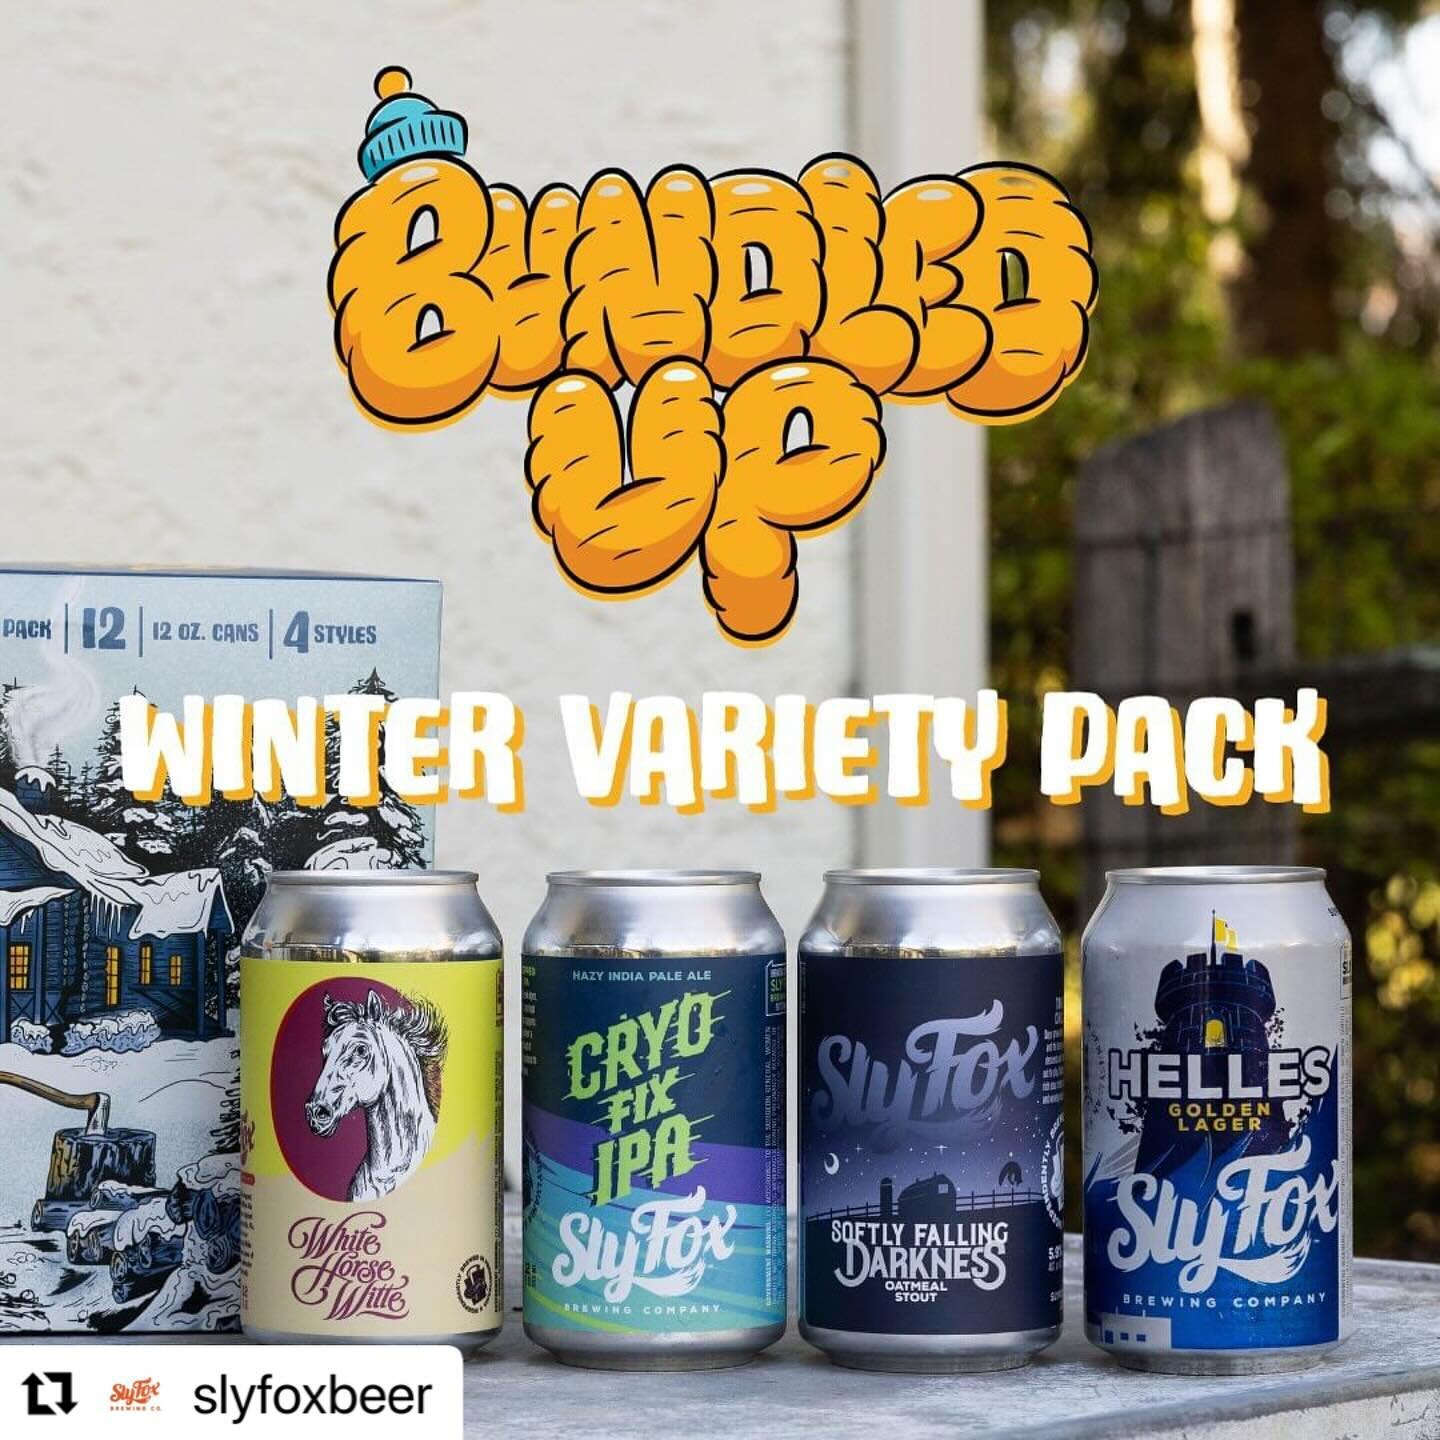 Available throughout FLORIDA!
@slyfoxbeer 
・・・
We recently dropped the perfect winter variety pack to keep you cozy through this winter season. We bundled up 4 beers that we think pair perfectly with a snowy walk, a fireside cuddle or a holiday party